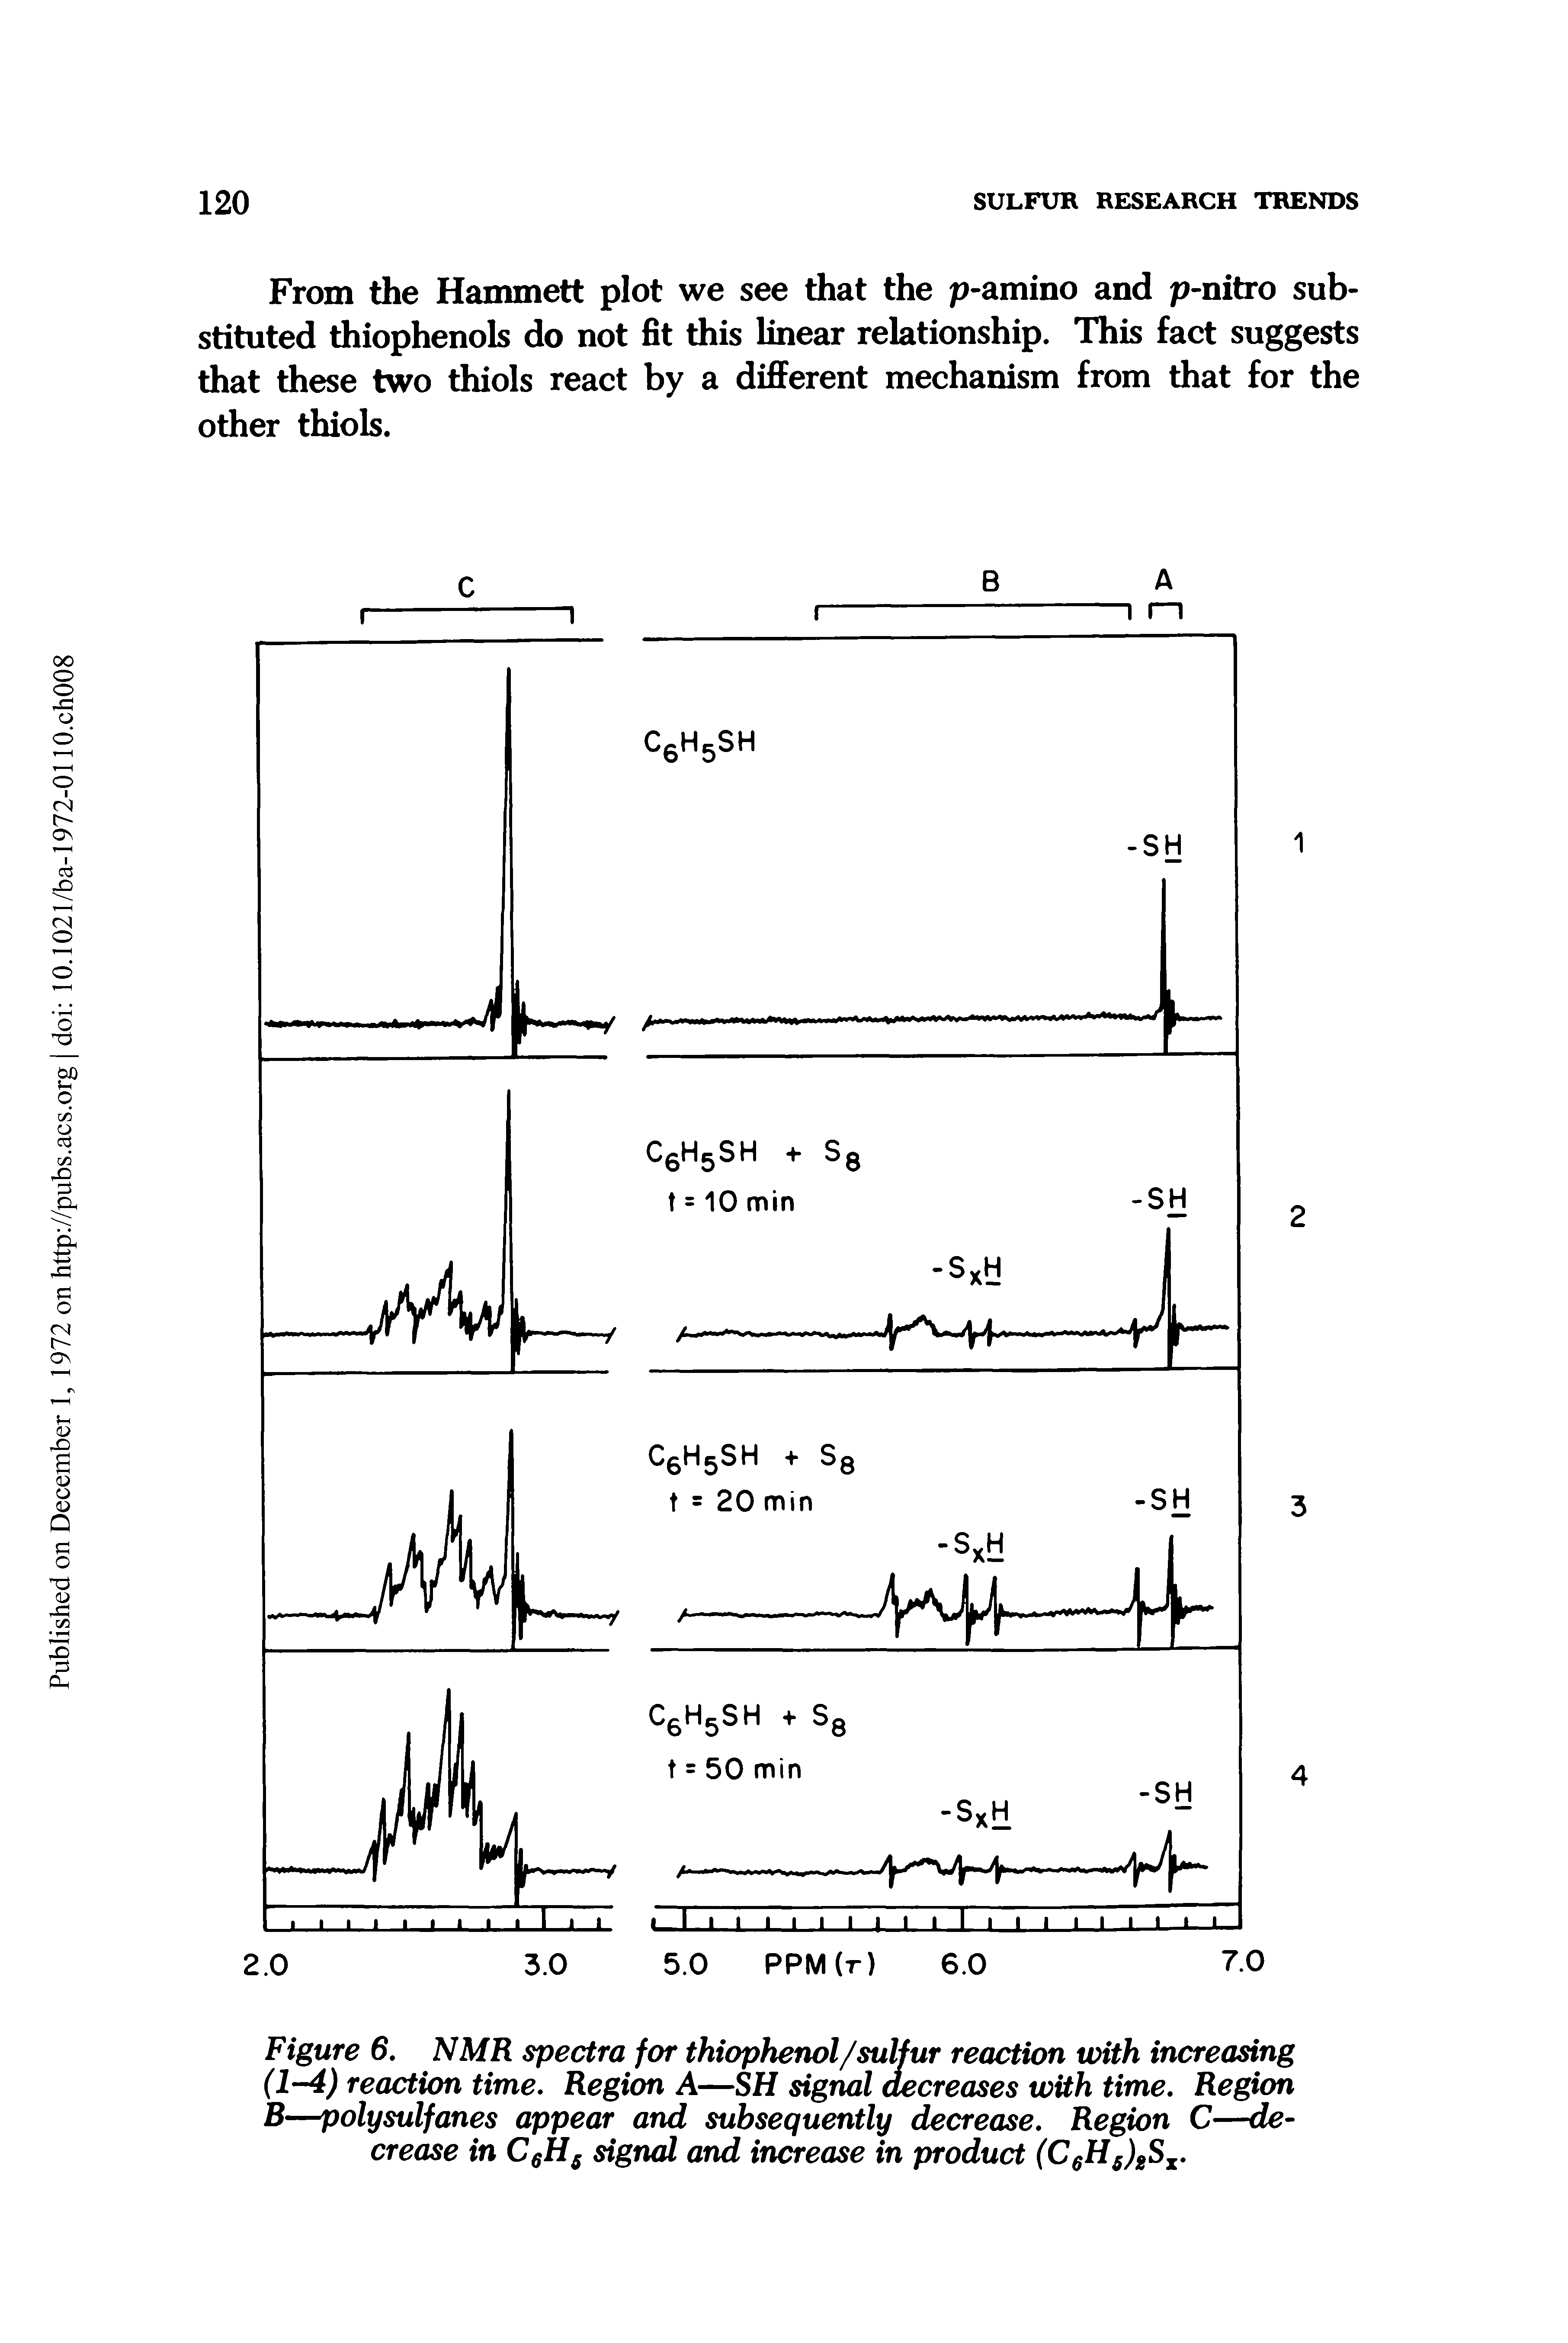 Figure 6. NMR spectra for thiophenol/sulfur reaction with increasing (1-4) reaction time. Region A—SH signal decreases with time. Region B—polysulfanes appear and subsequently decrease. Region C— crease in signal and increase in product (CgHg)gSj. ...